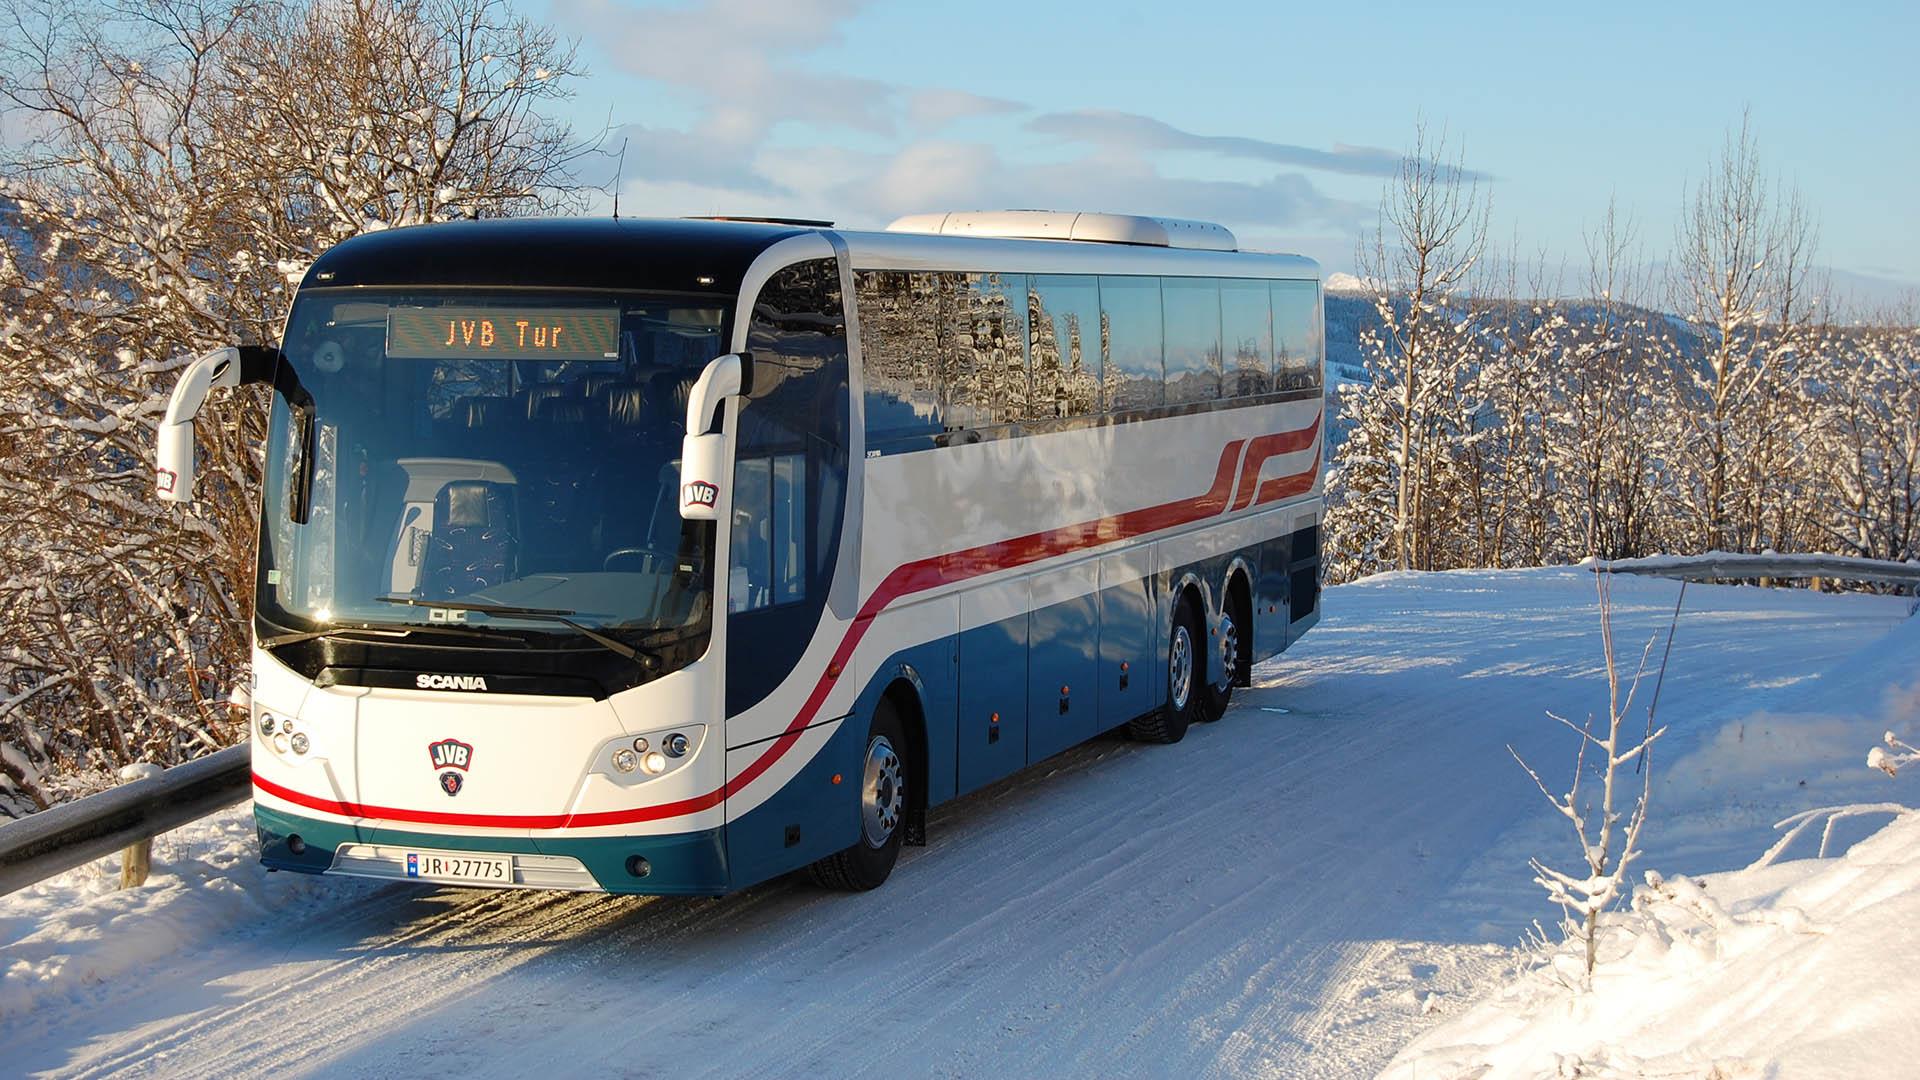 A tour coach in the sunshine on a snowy road